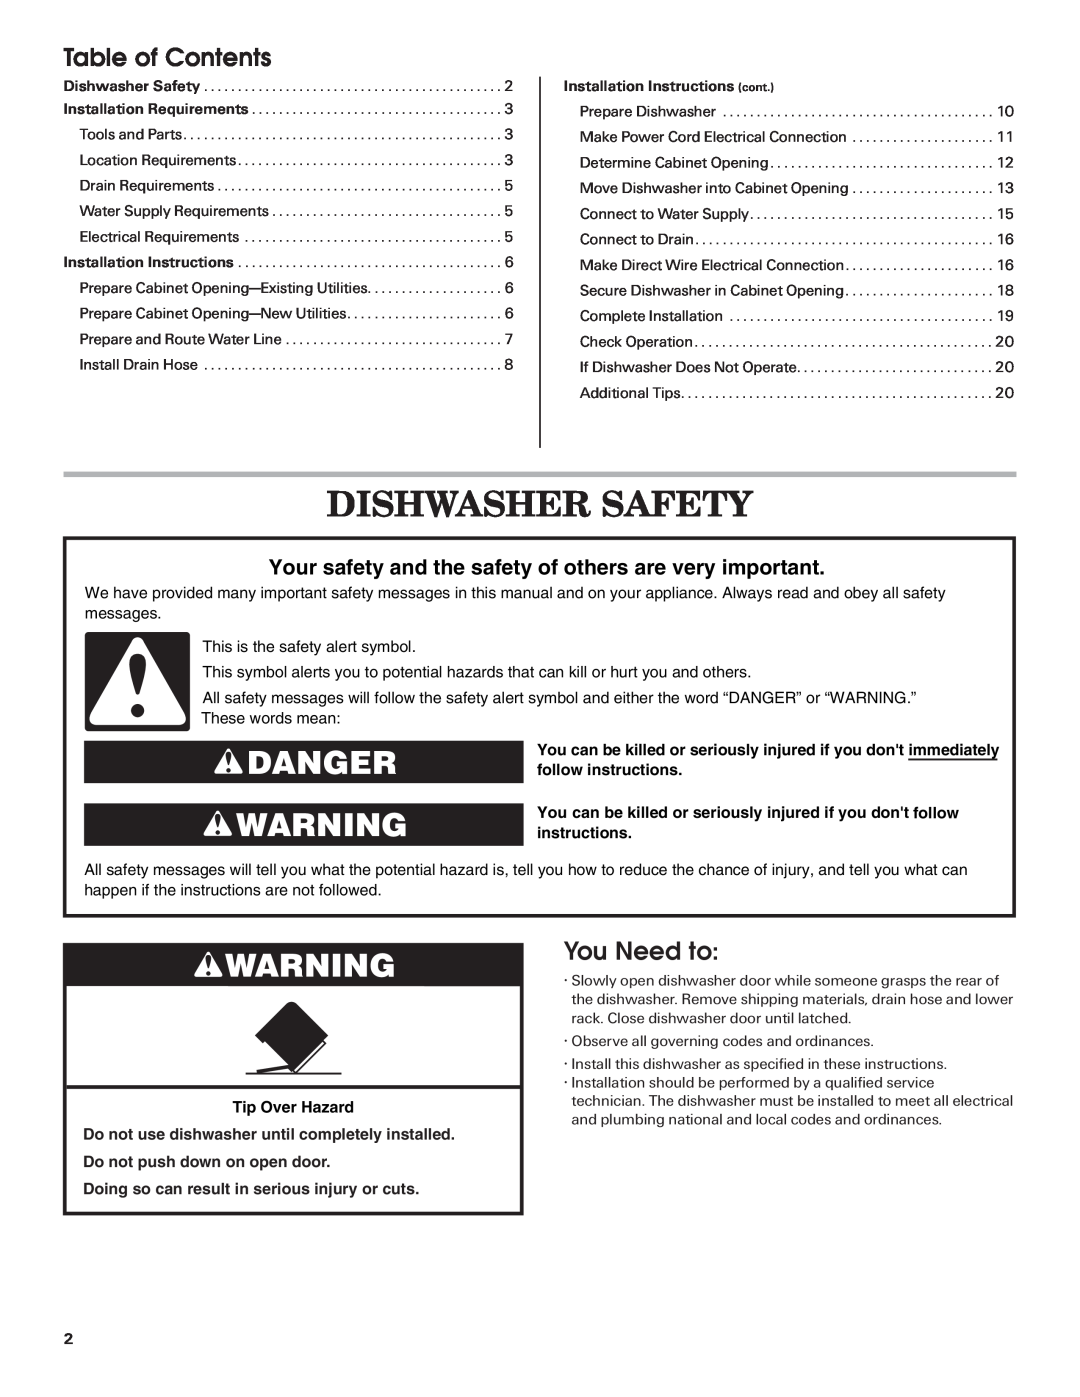 Amana W10261420A installation instructions Dishwasher Safety, Danger, Table of Contents, You Need to, Tip Over Hazard 